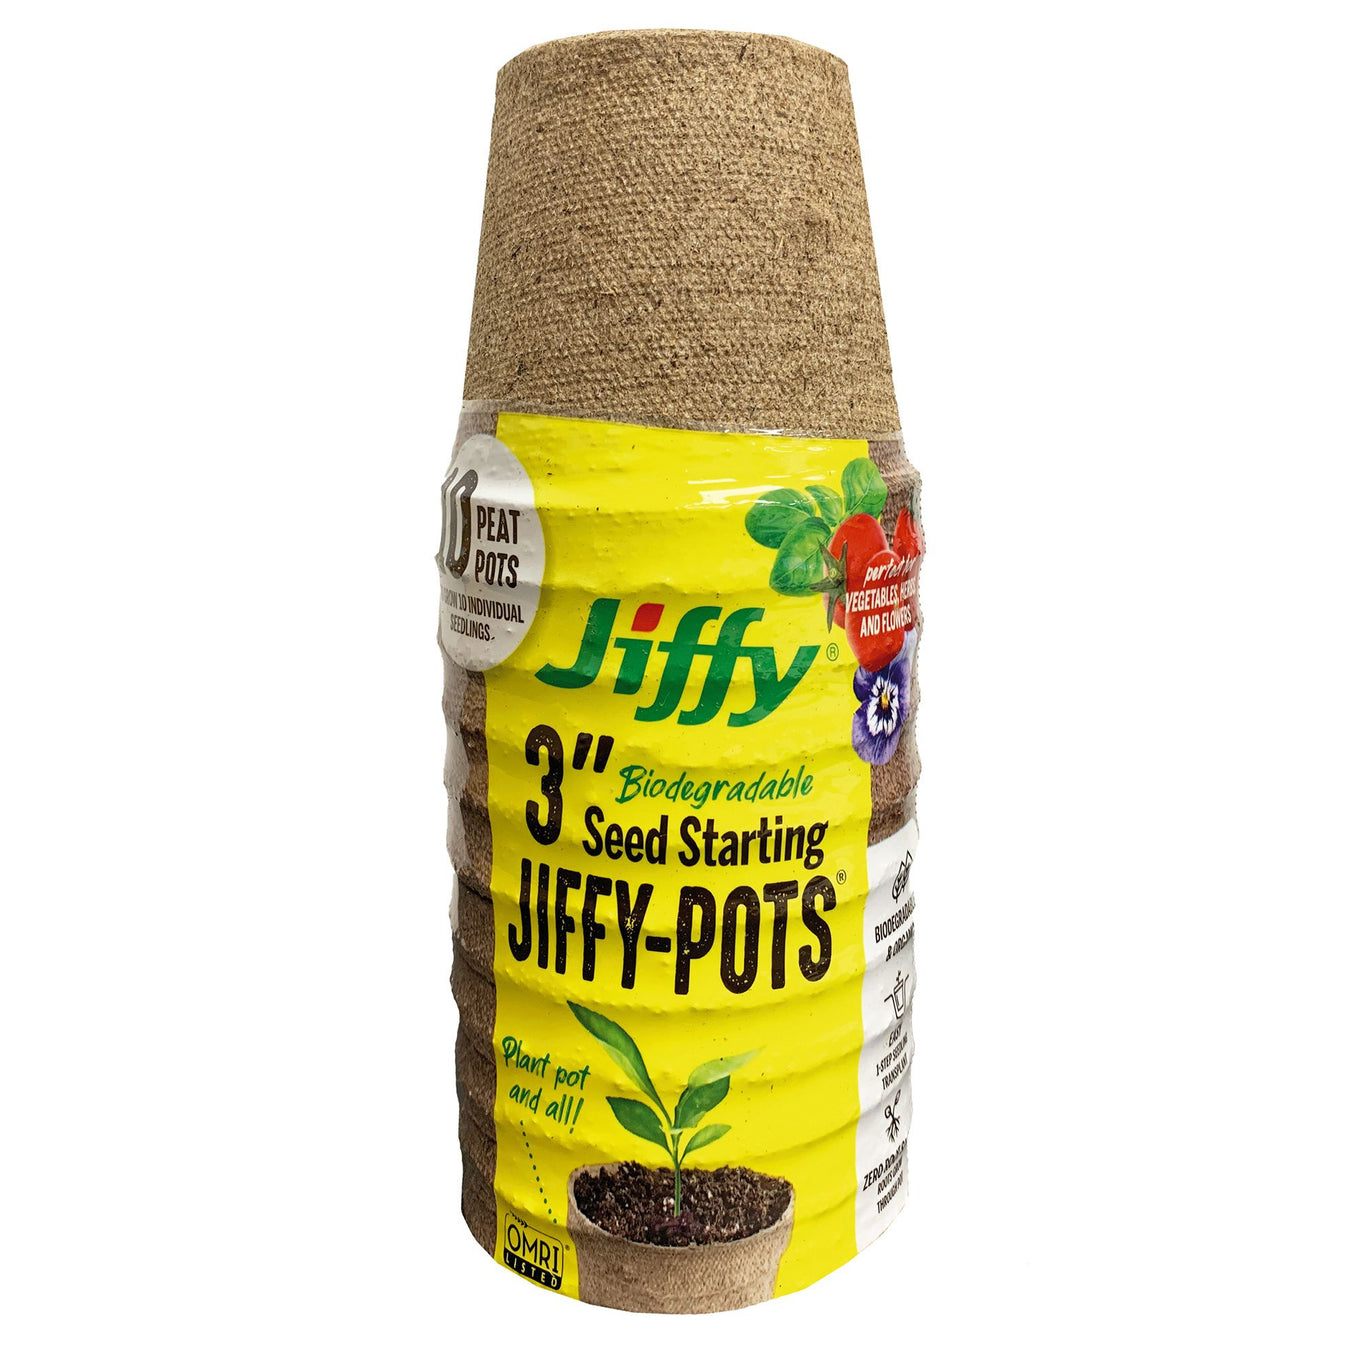 Growing organic herbs and vegetables with Jiffy Pots